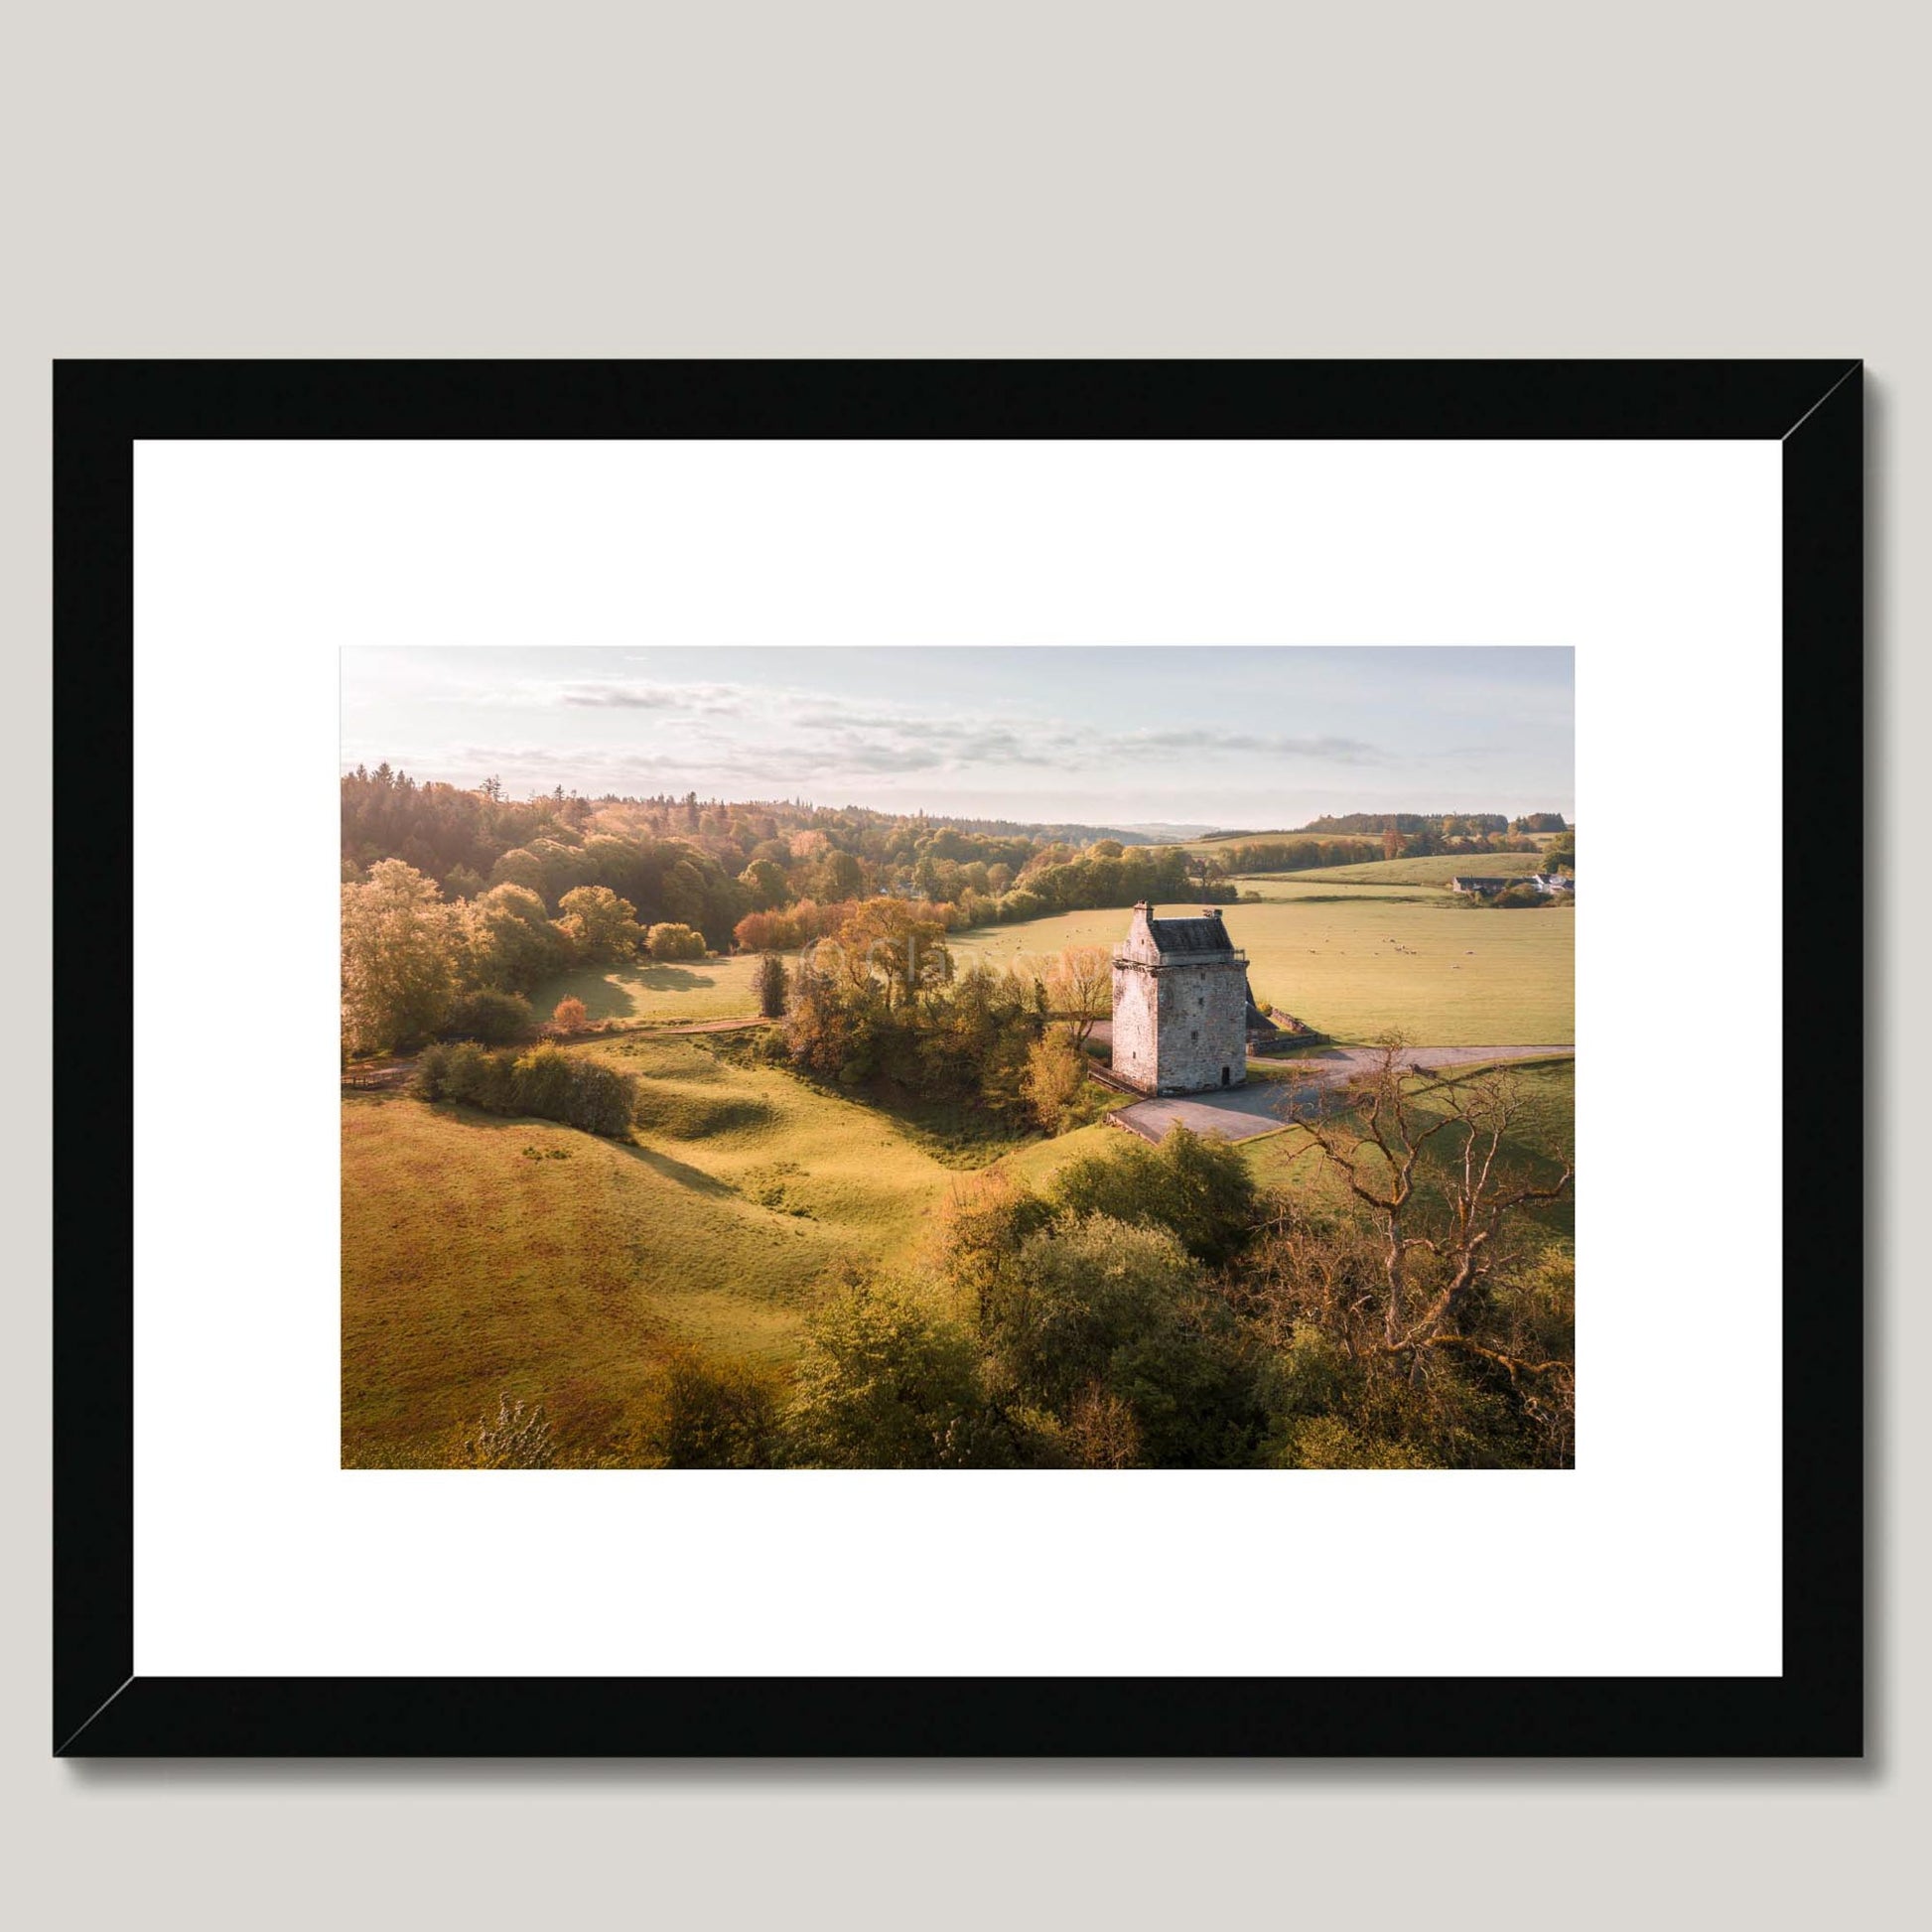 Clan Armstrong - Gilnockie Tower - Framed & Mounted Landscape Photography Print 16"x12" Black